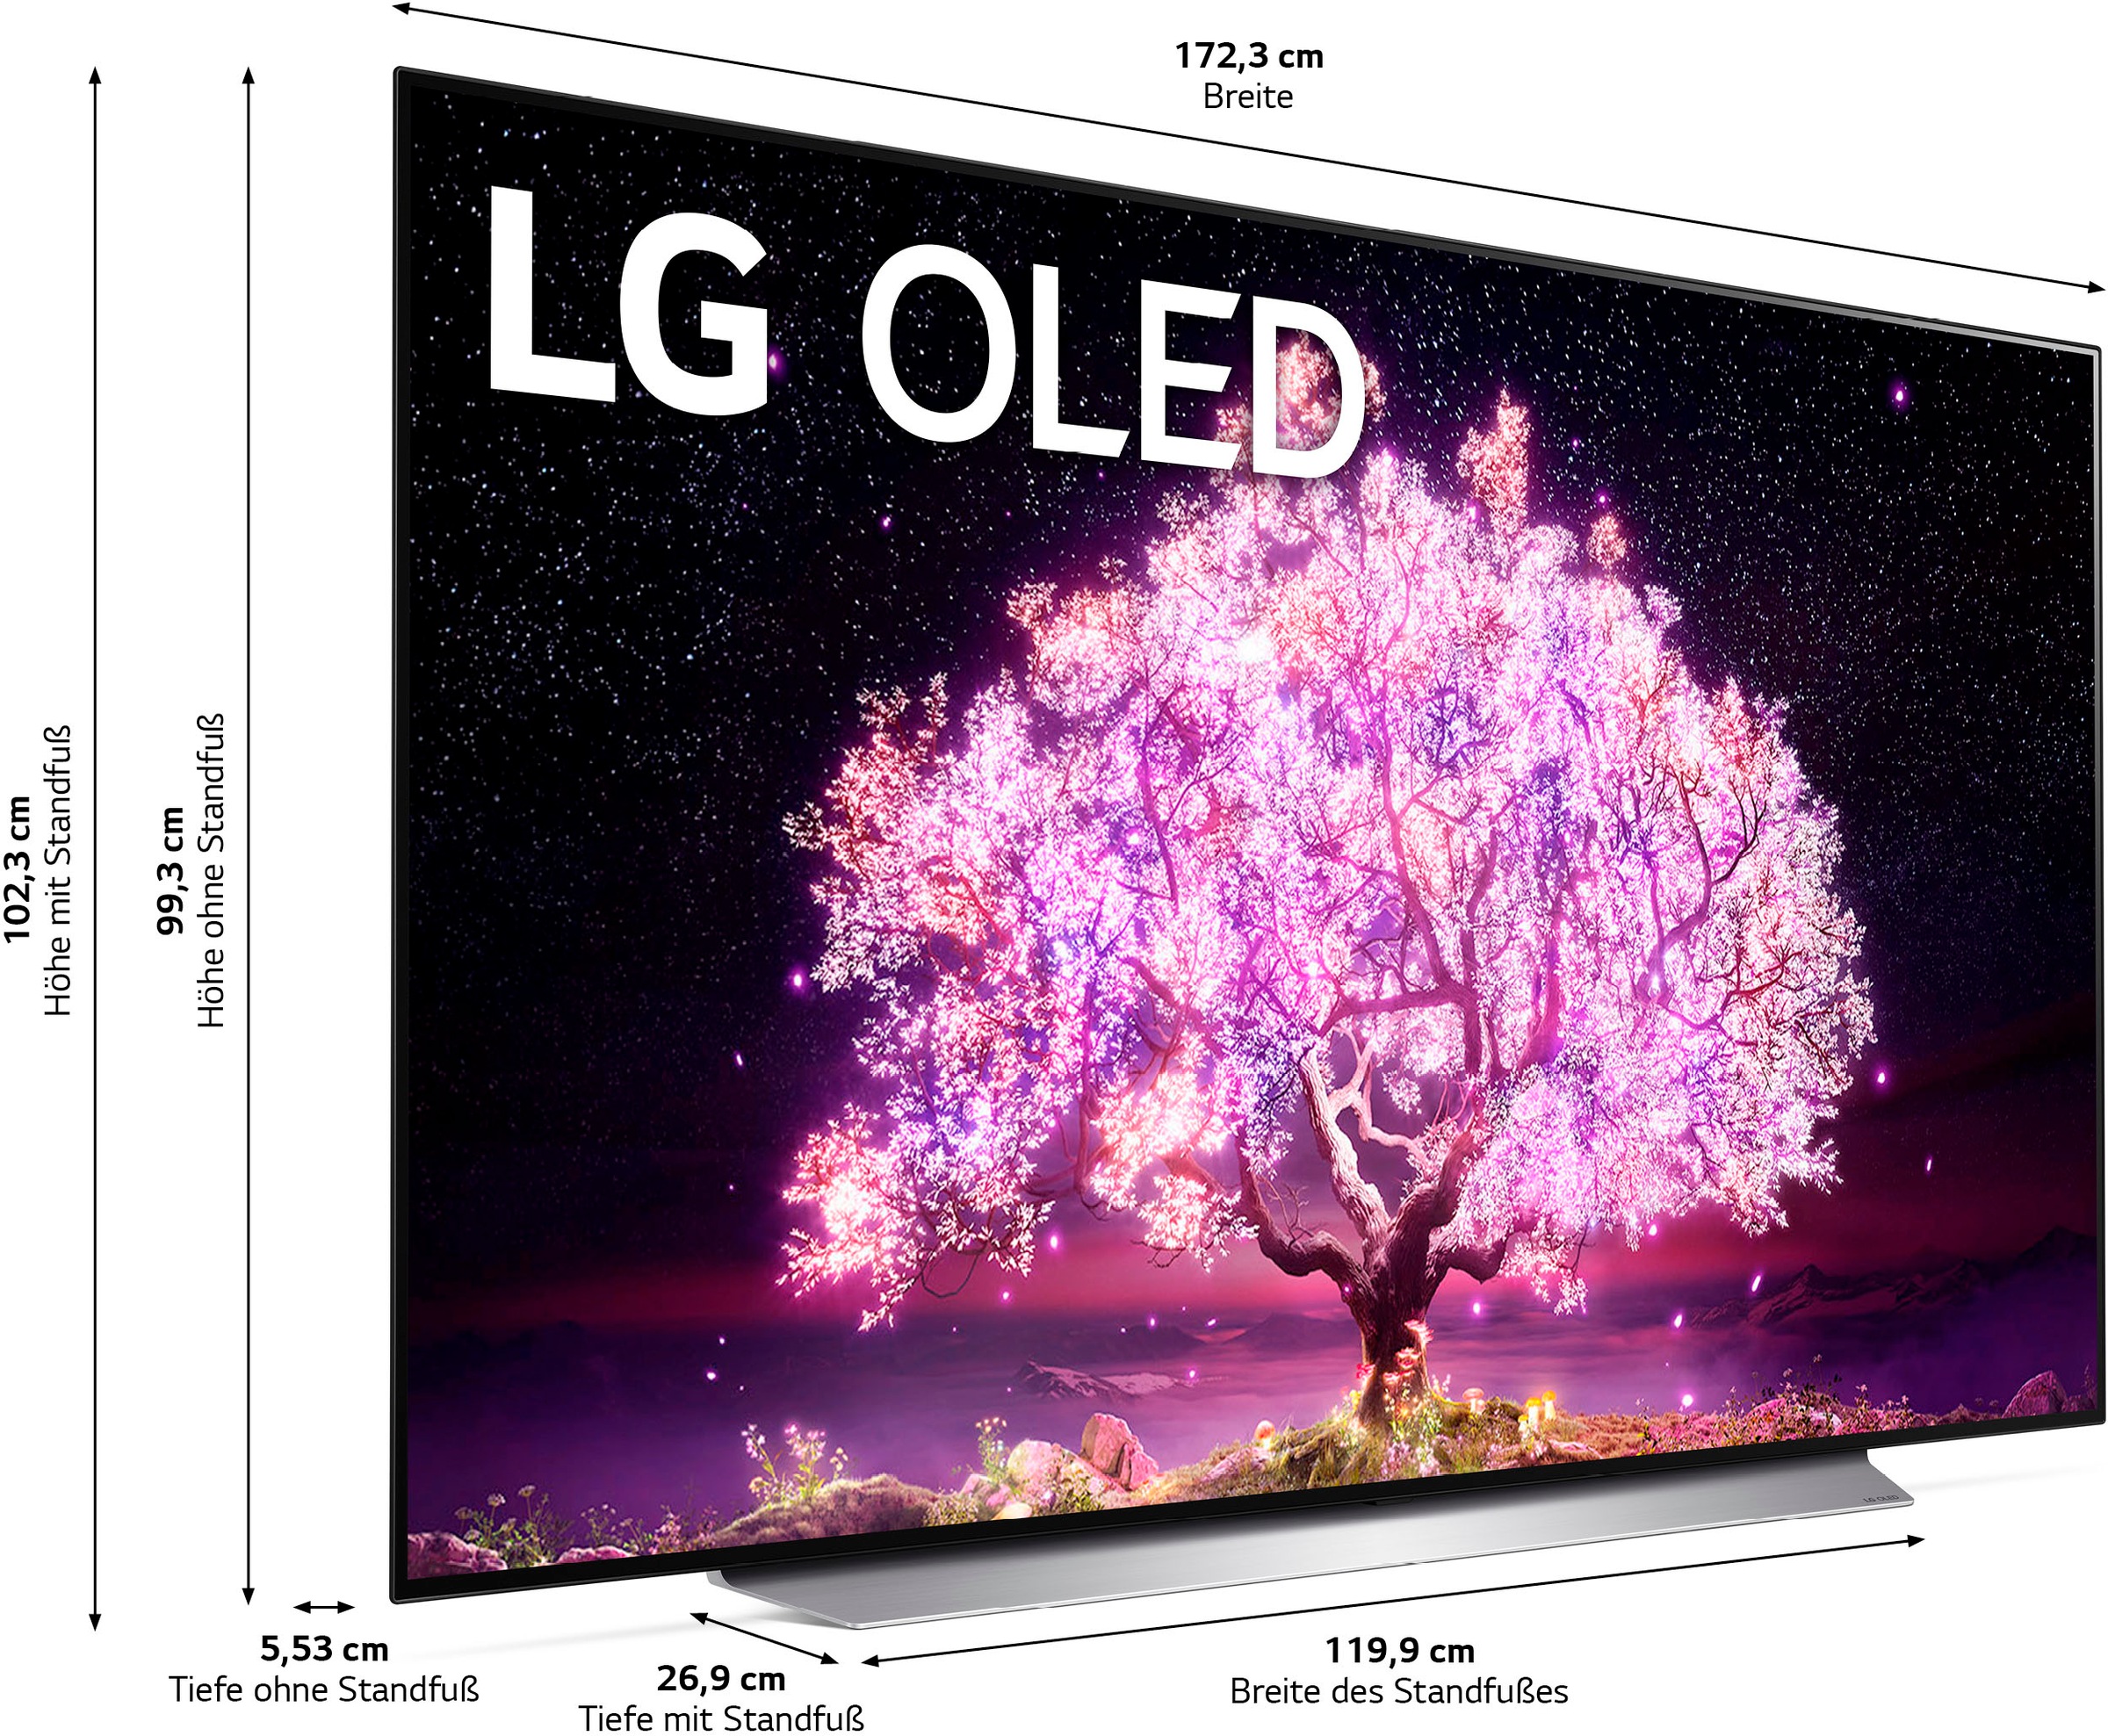 »OLED77C17LB«, HD, Dolby 4K OTTO kaufen 4K & AI-Prozessor,Dolby Vision OLED,α9 cm/77 LG Zoll, Ultra jetzt 195 Gen4 bei Smart-TV, Atmos OLED-Fernseher